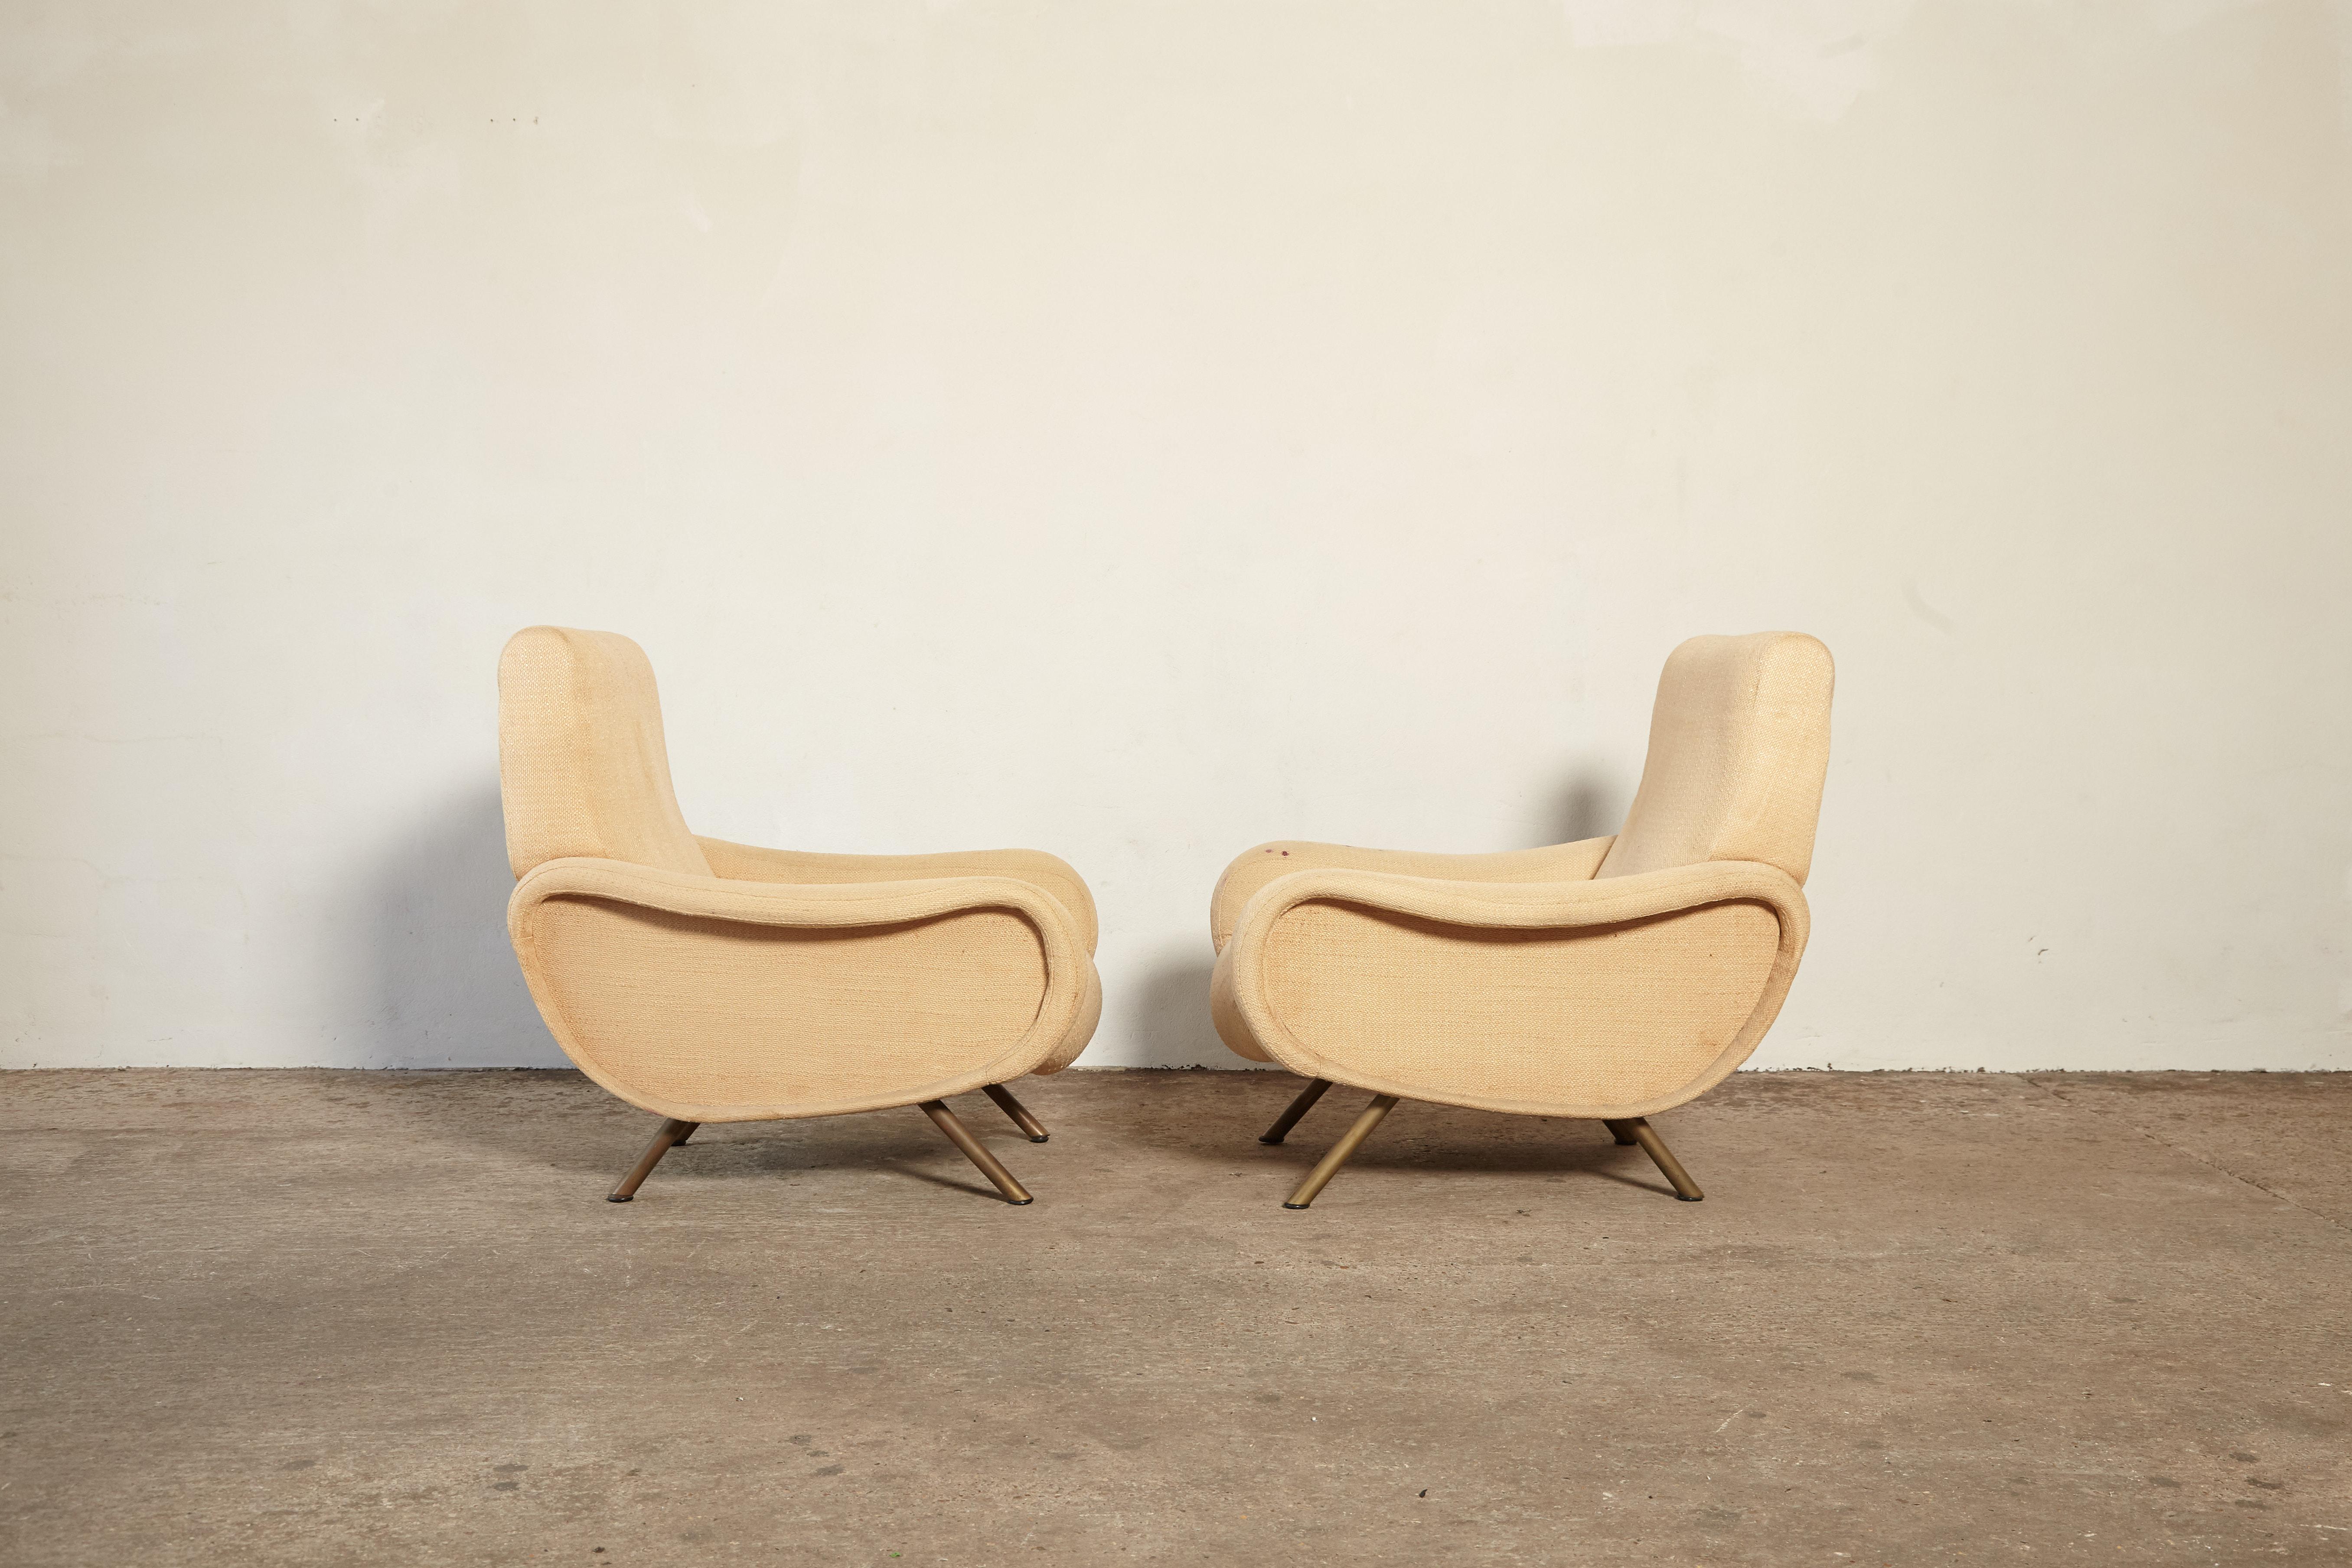 A pair of original and authentic Marco Zanuso Lady chairs, Arflex, France/Italy, 1960s. The upholstery is worn so the chairs require re-upholstery. Ships worldwide. 


The chairs shown here are for reference (these are chairs we sold previously).